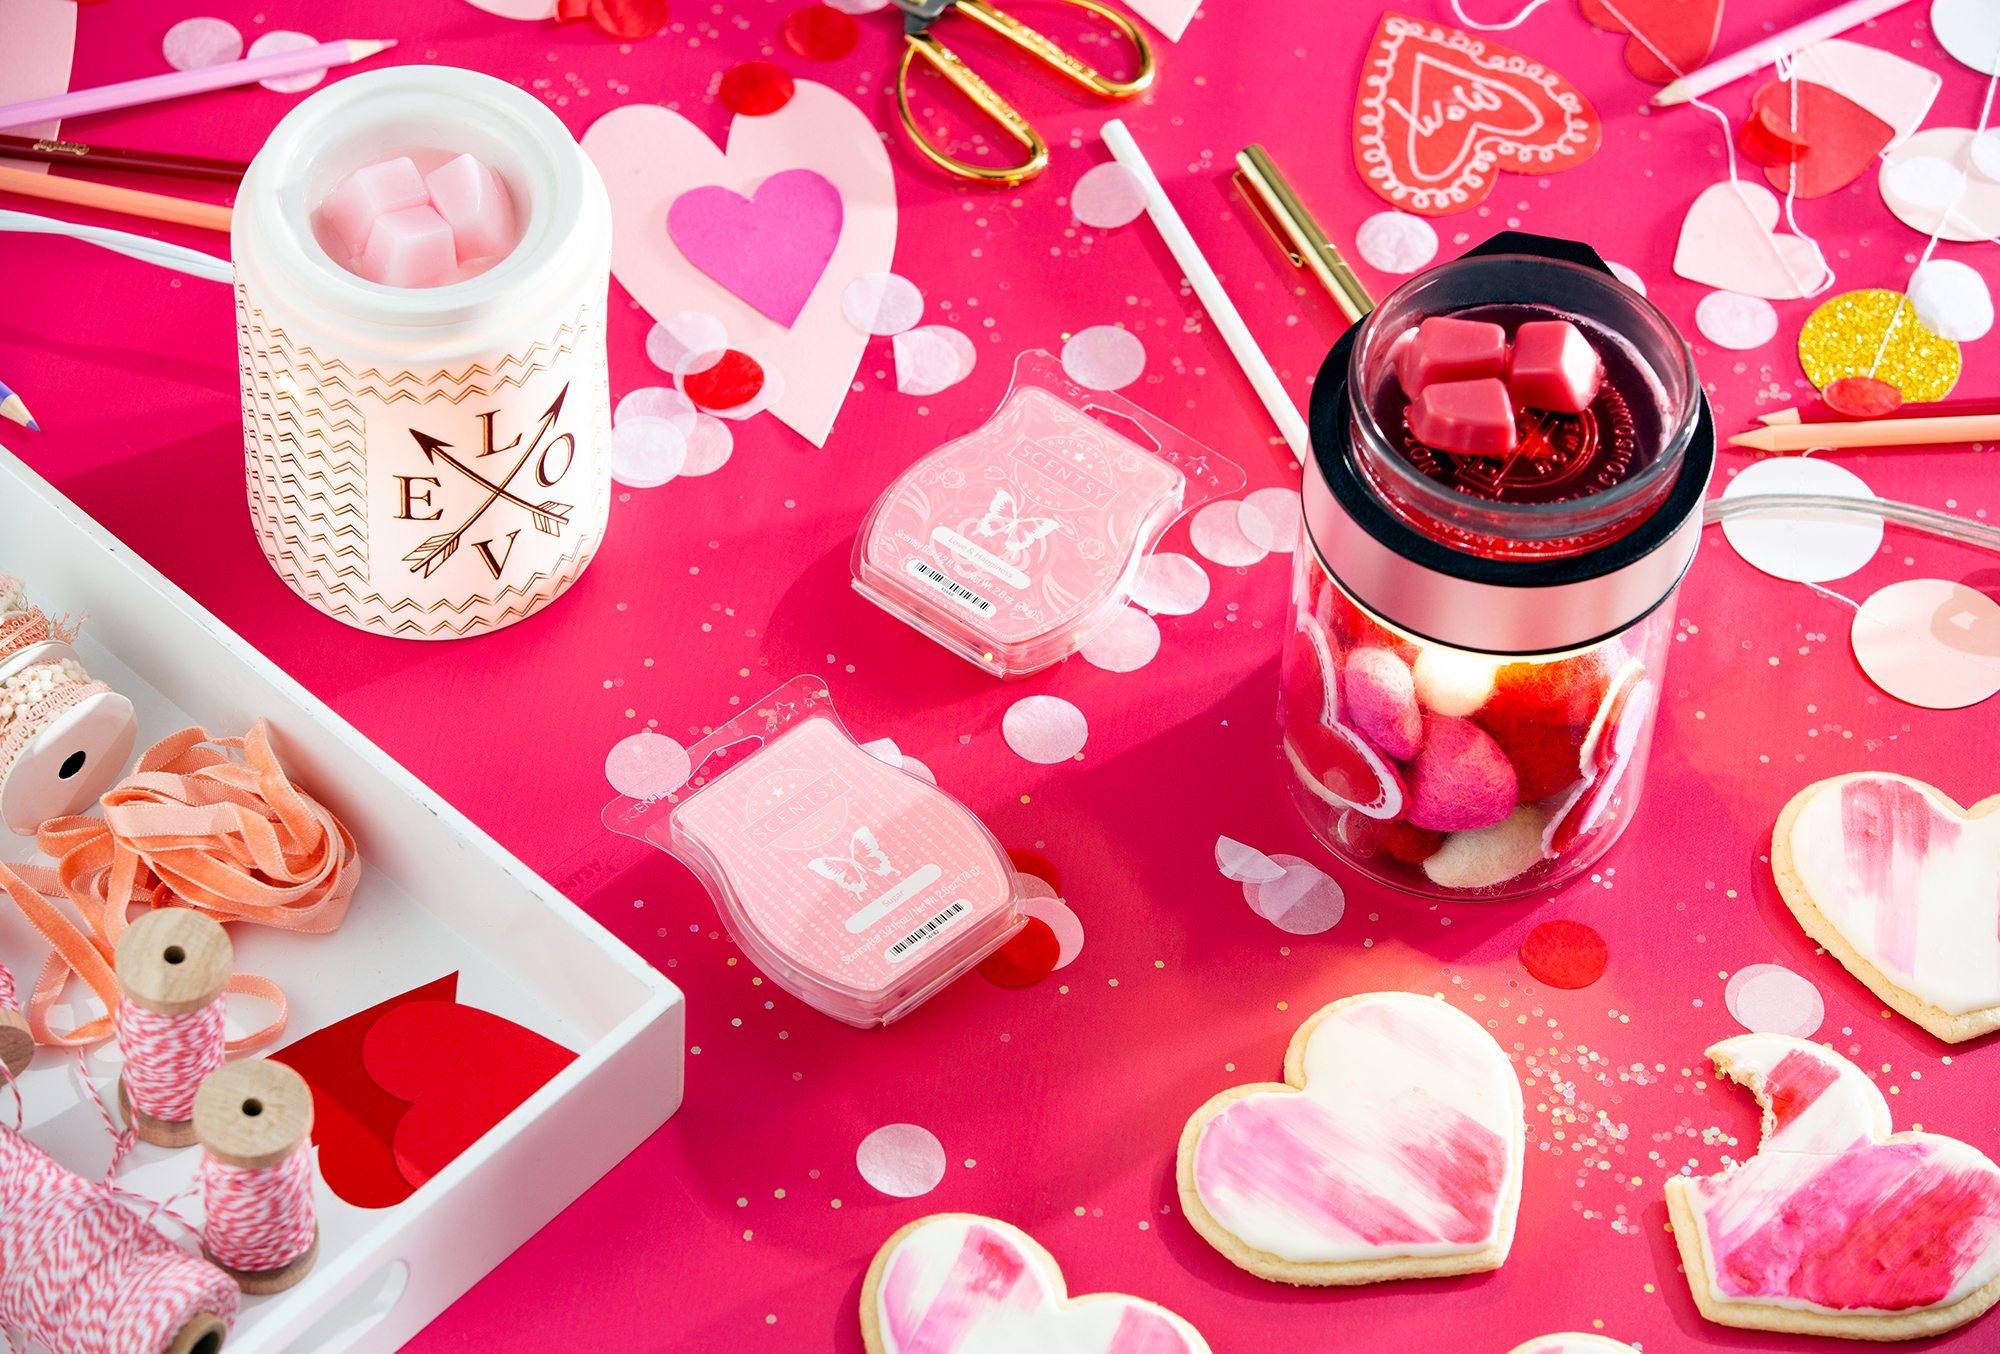 Host a Valentine’s Day party they’ll love